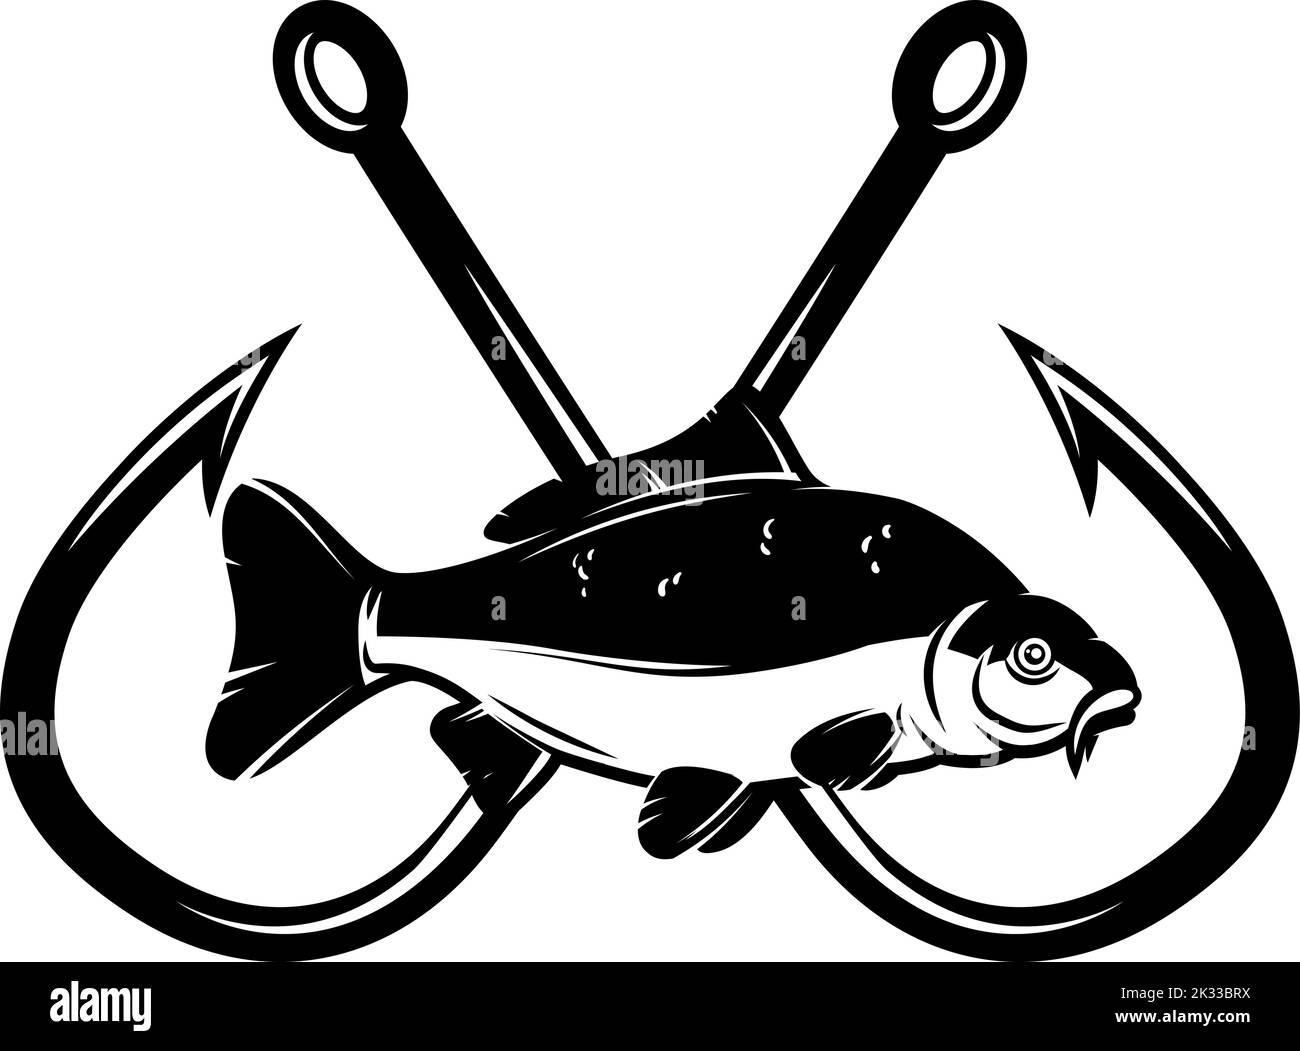 Crossed fishing hook Black and White Stock Photos & Images - Alamy